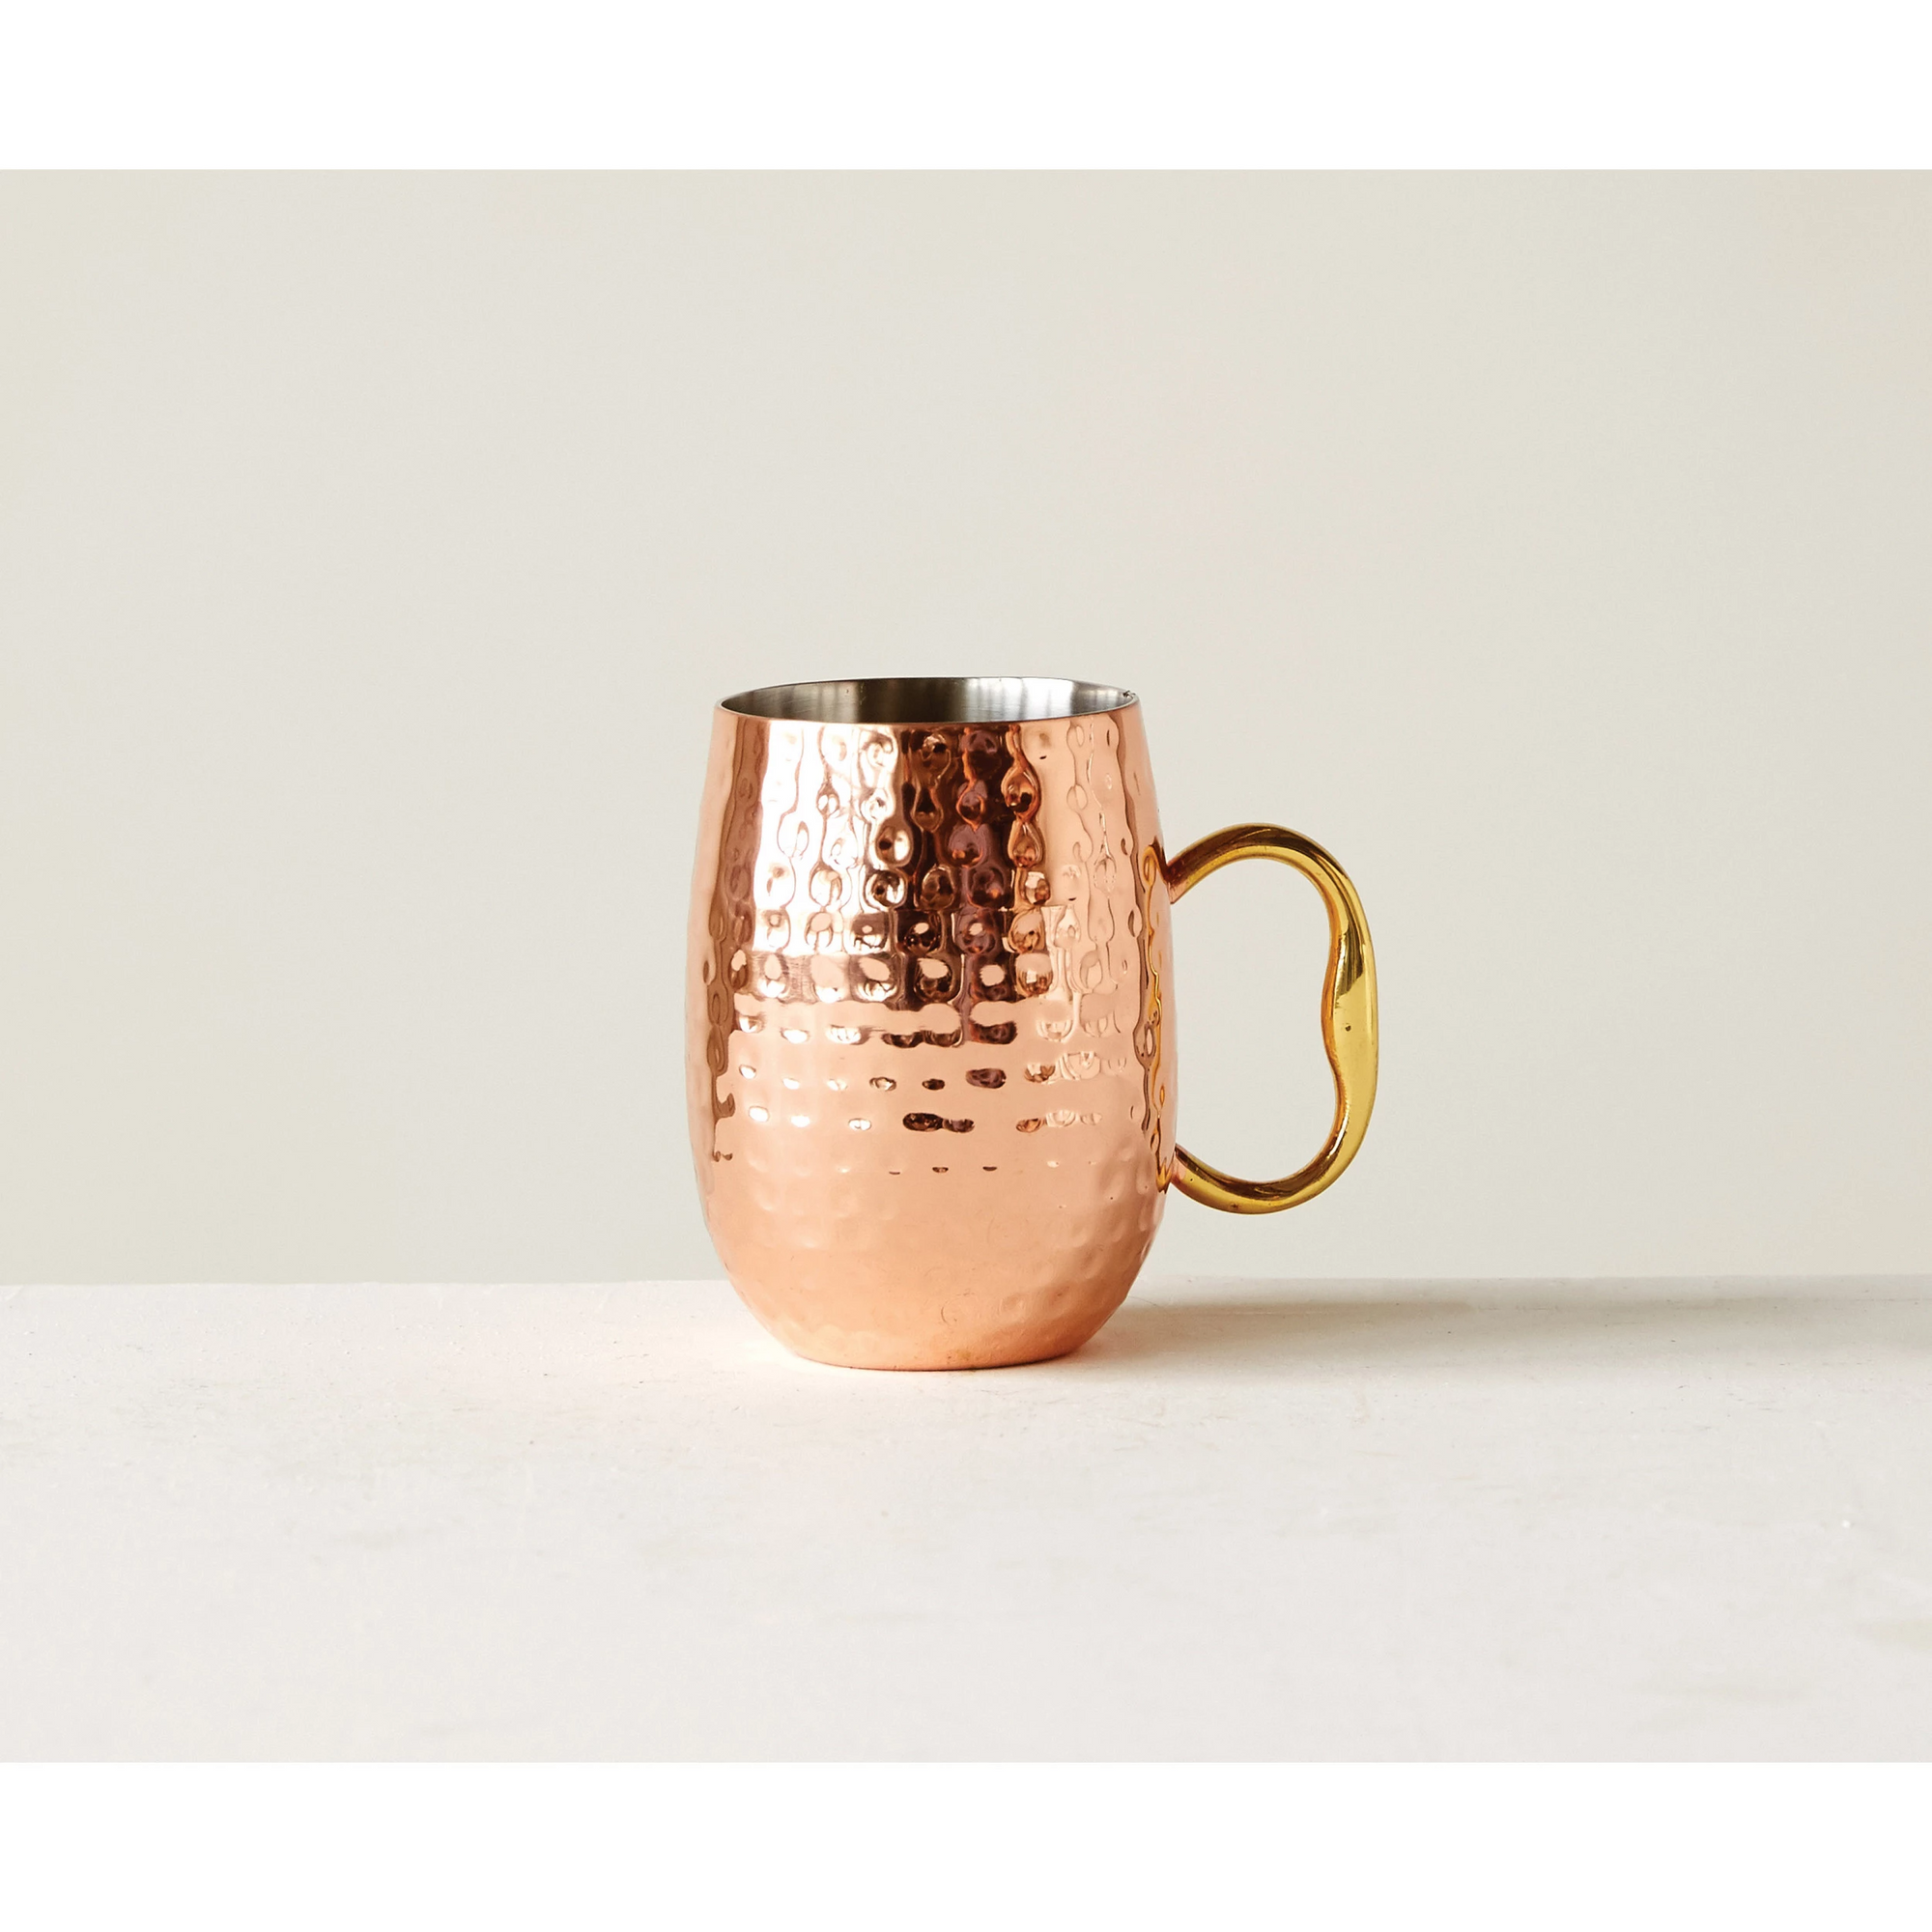 Hammered Stainless Steel Mule Mug, Copper Finish